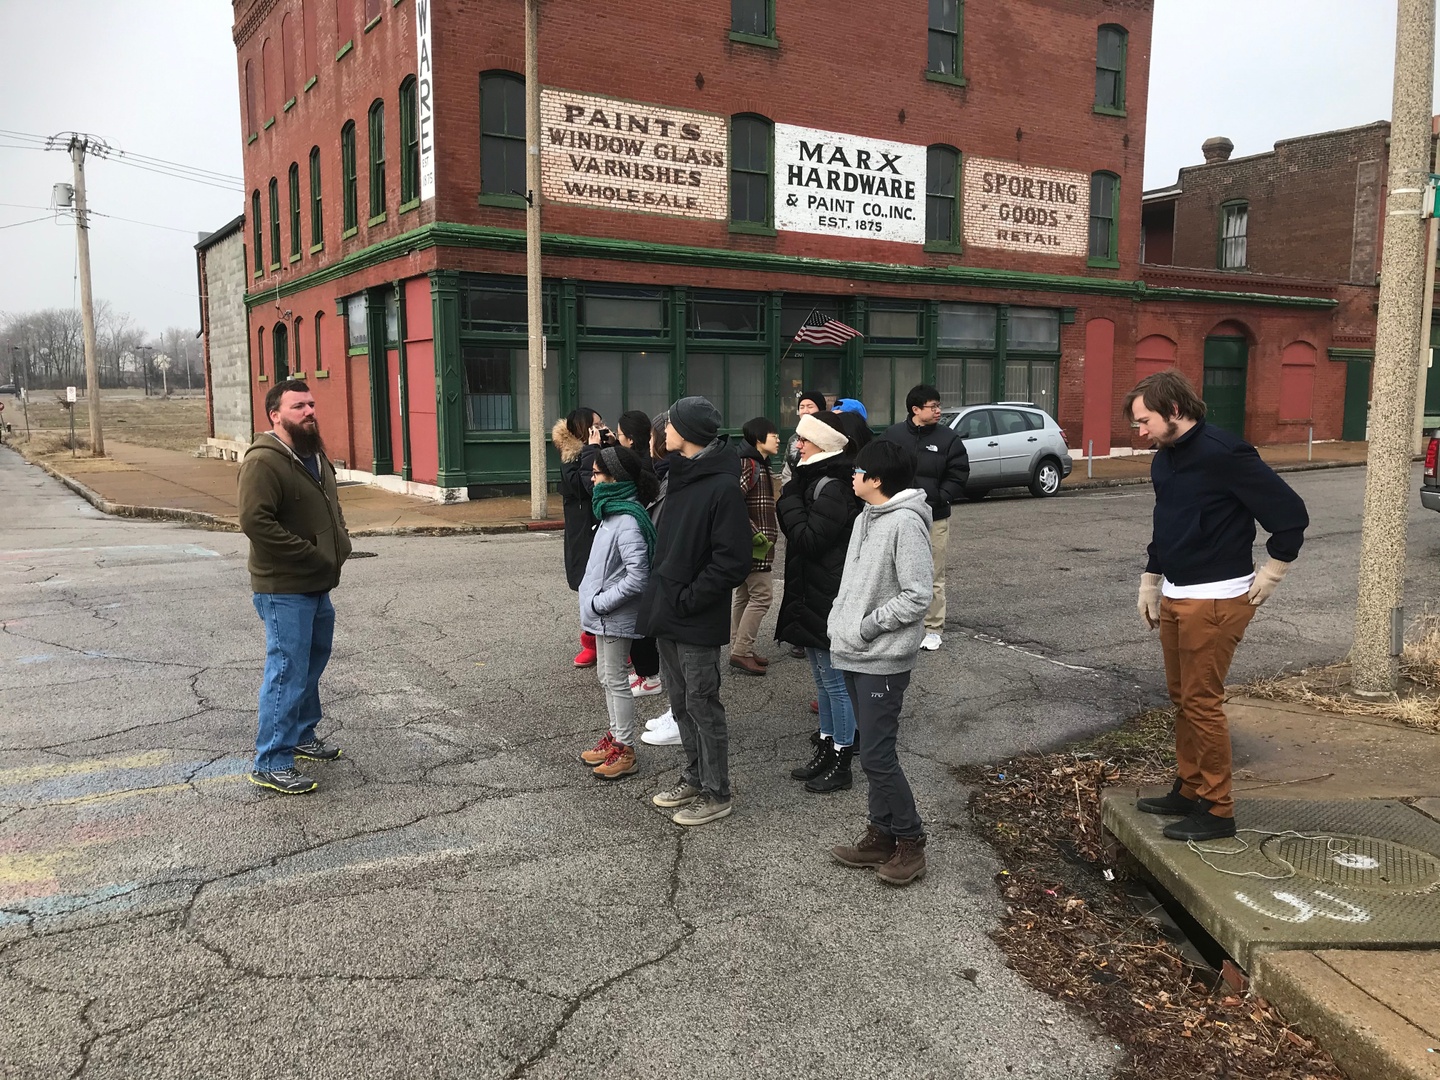 A group of people stand on the street and sidewalk in front of a brick building with the sign "Marx Hardware"